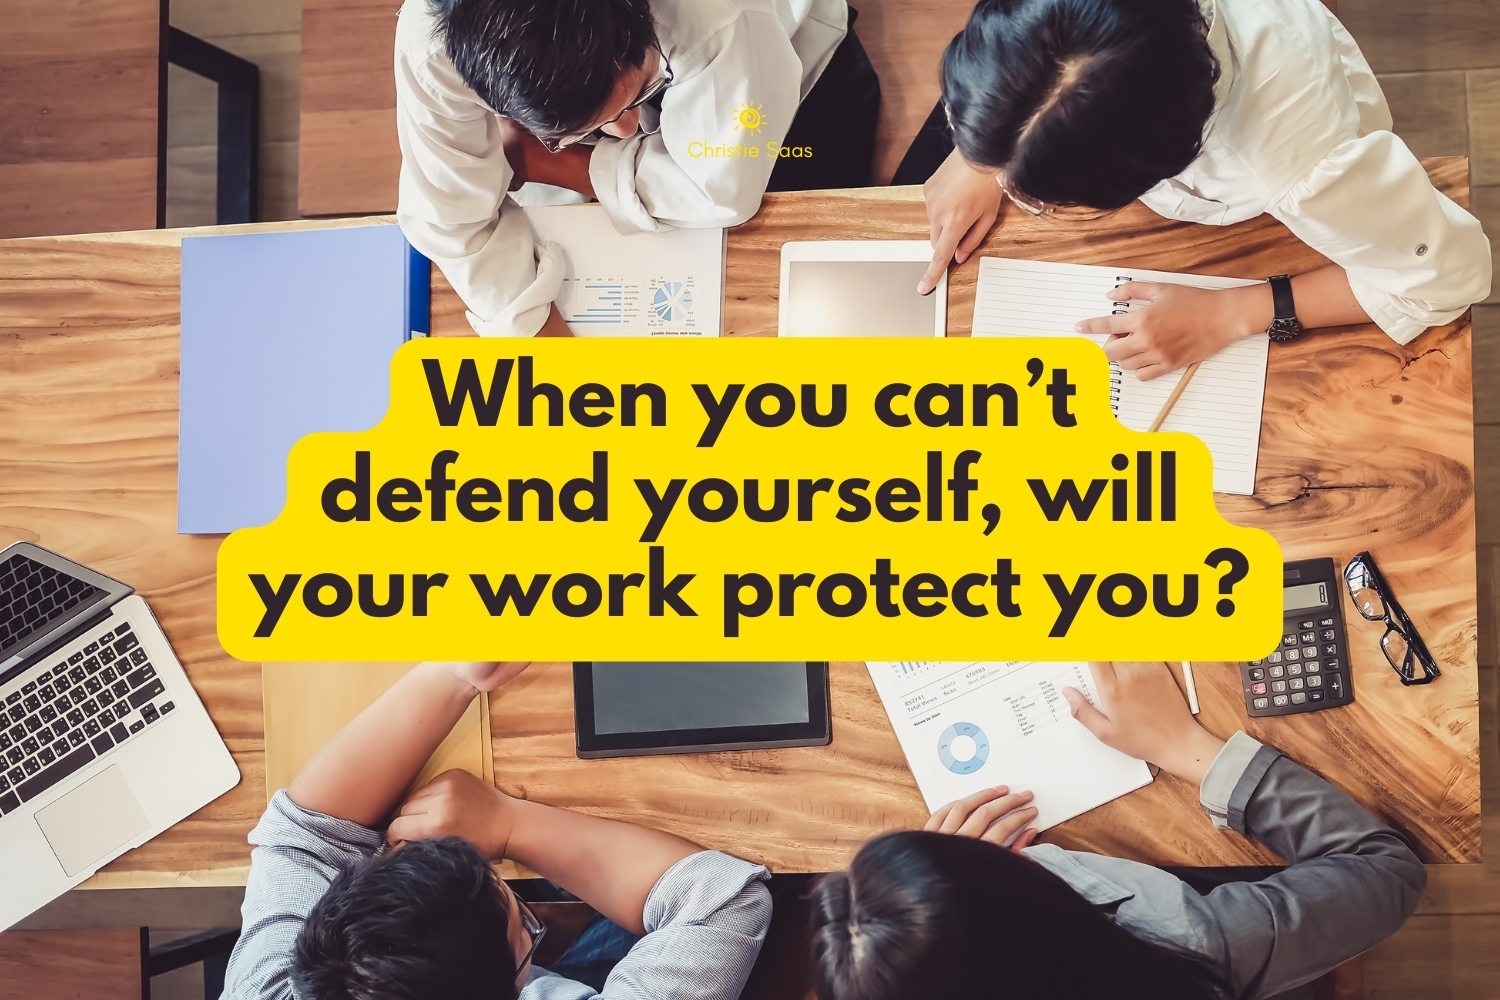 When you can't defend yourself, your work will protect you?